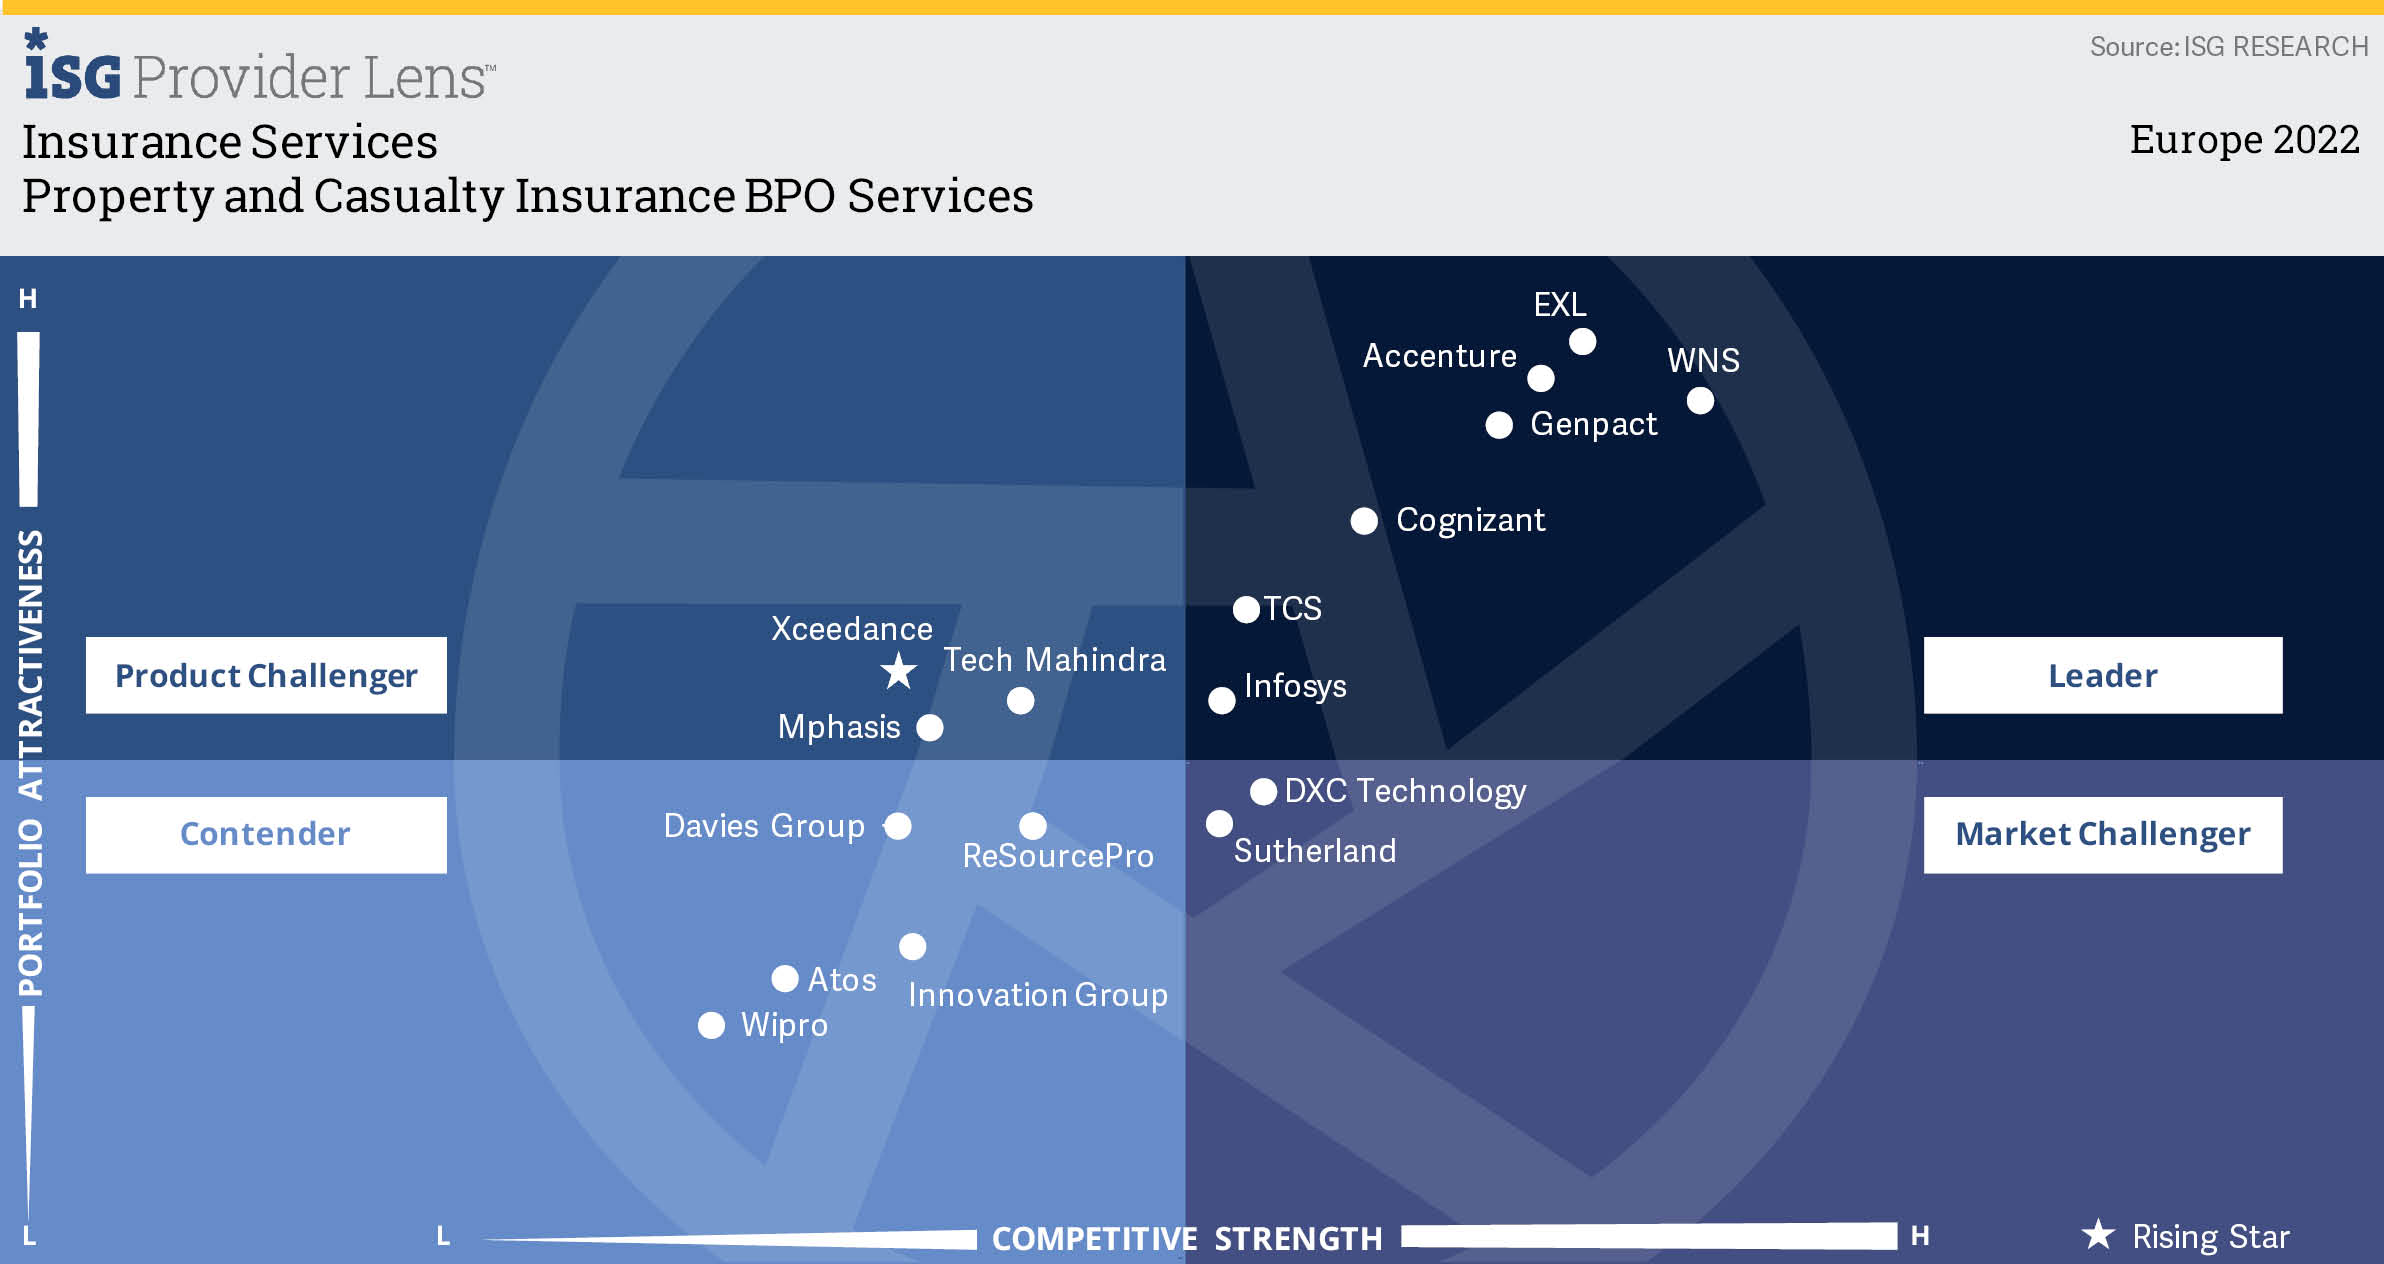 Europe - Property and Casualty Insurance BPO Services